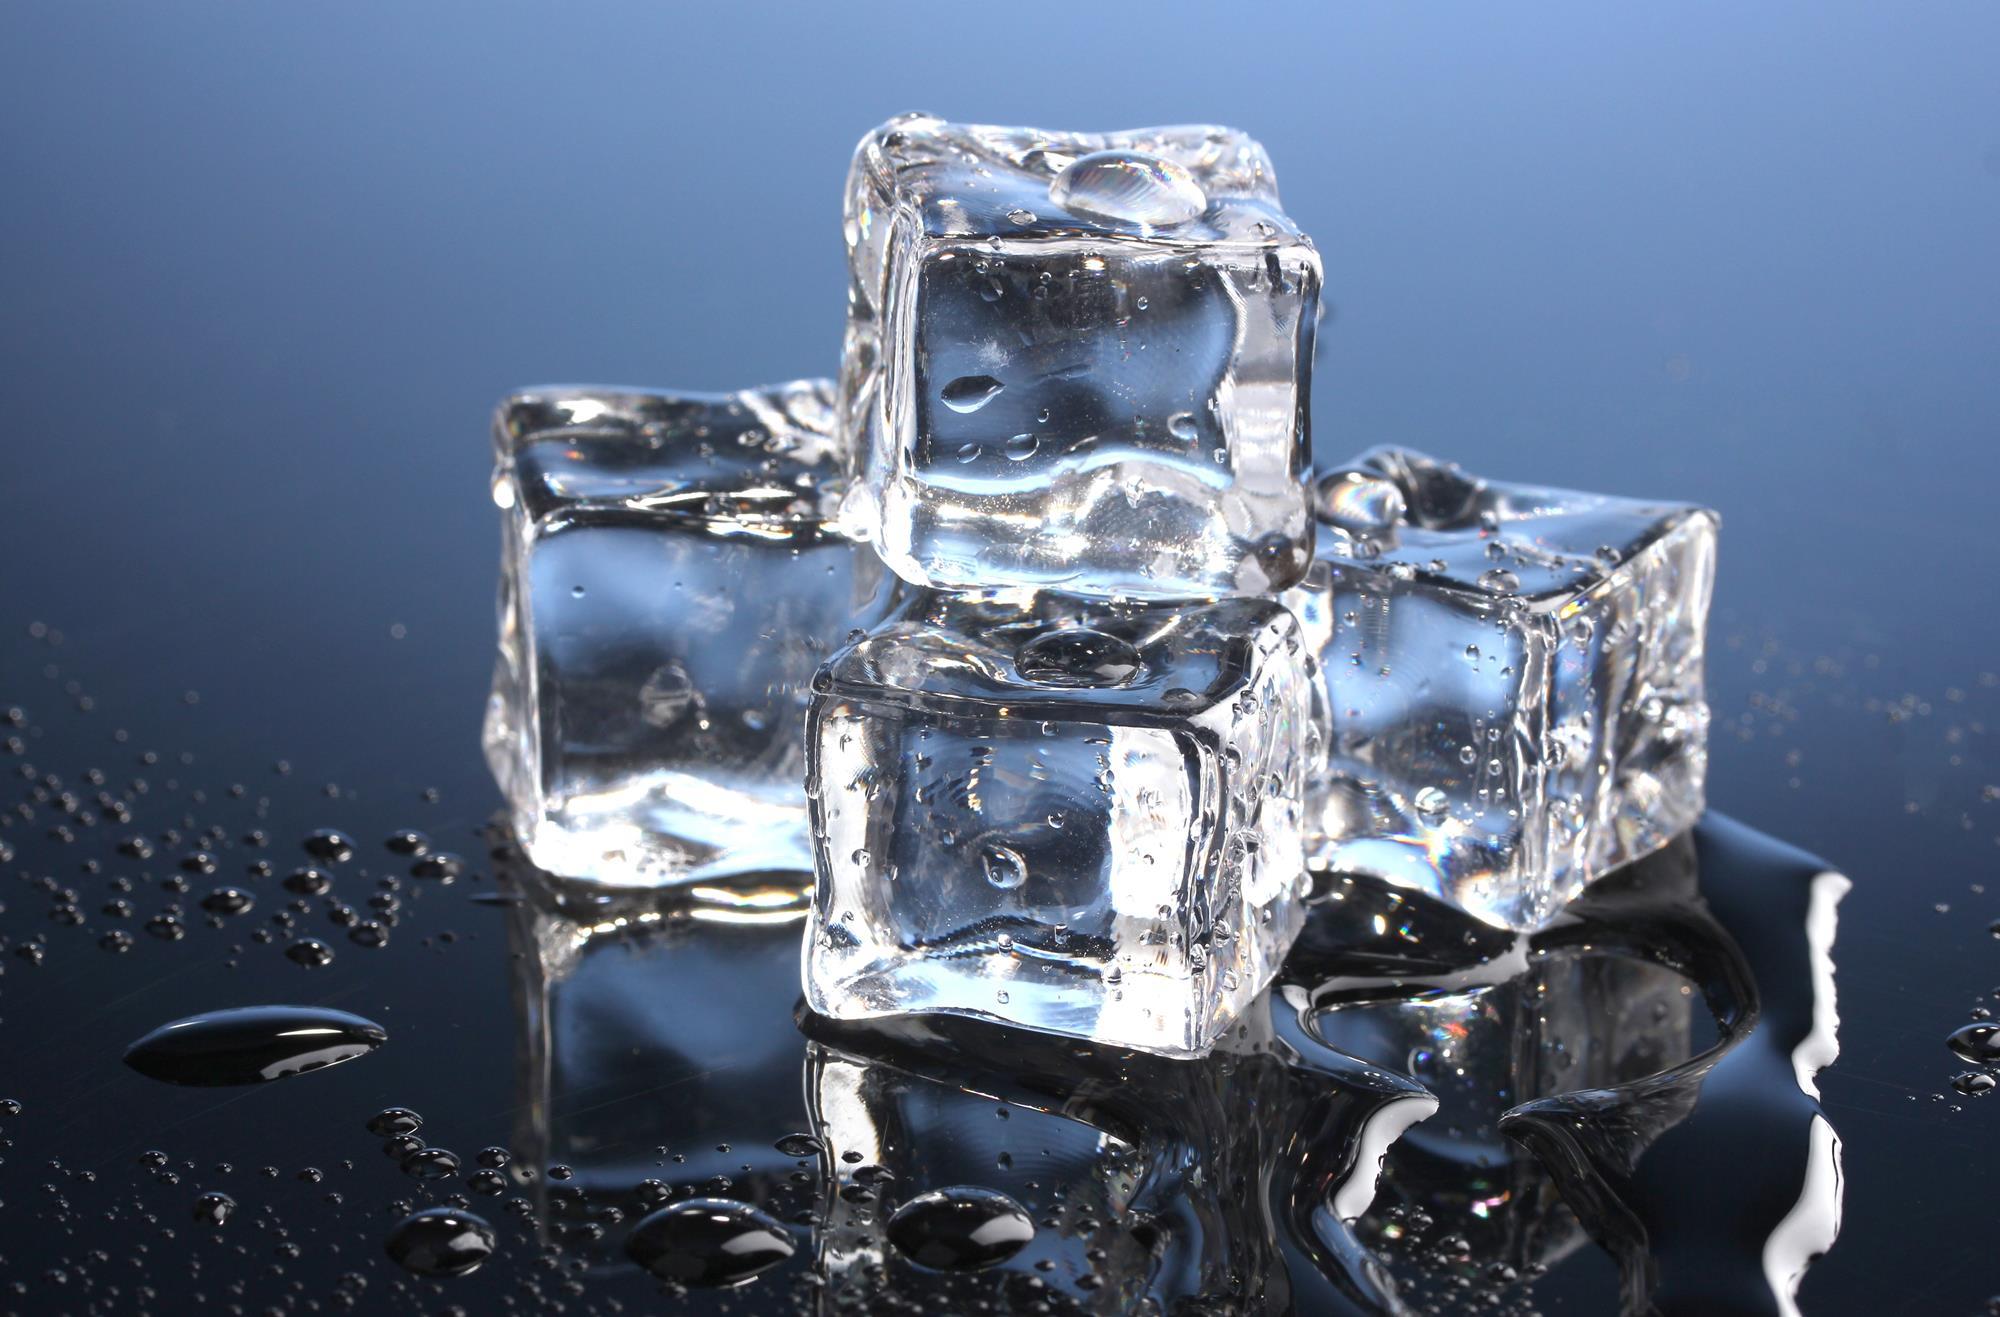 Bizarre Ice Xviii Is An Oxygen Ion Crystal Swimming In A Sea Of Protons |  Research | Chemistry World